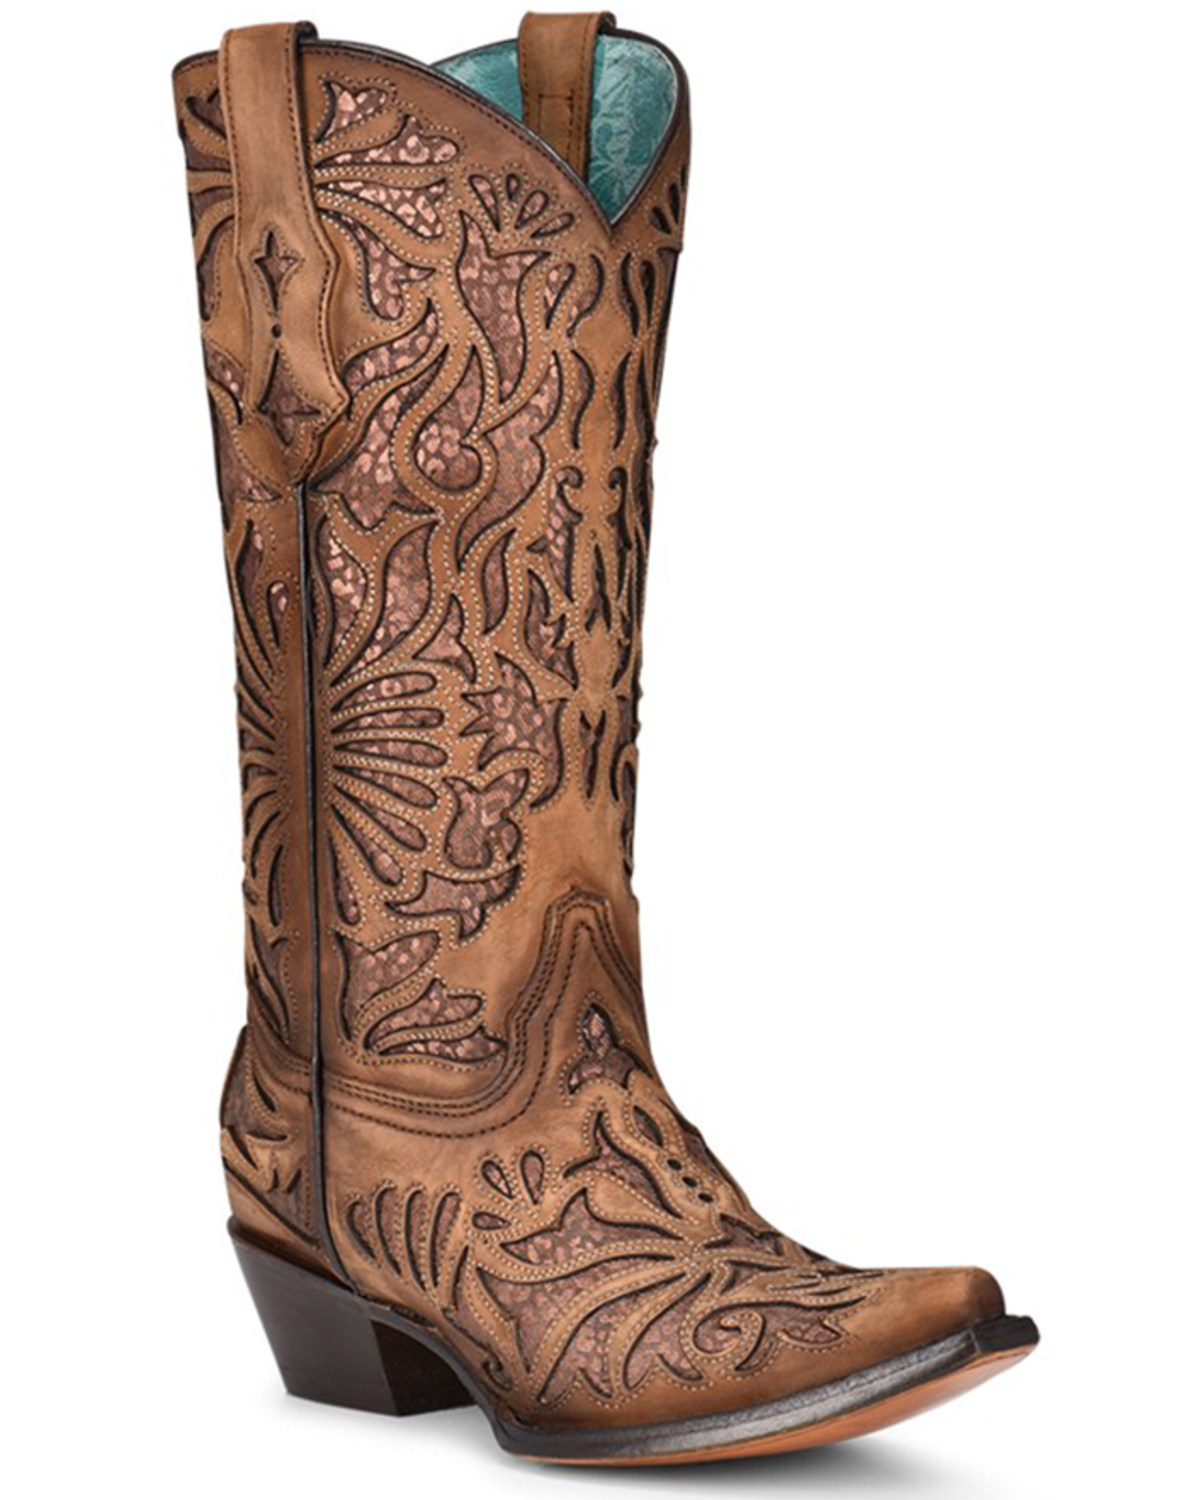 Corral Women's Shedron Inlay Western Boots - Snip Toe